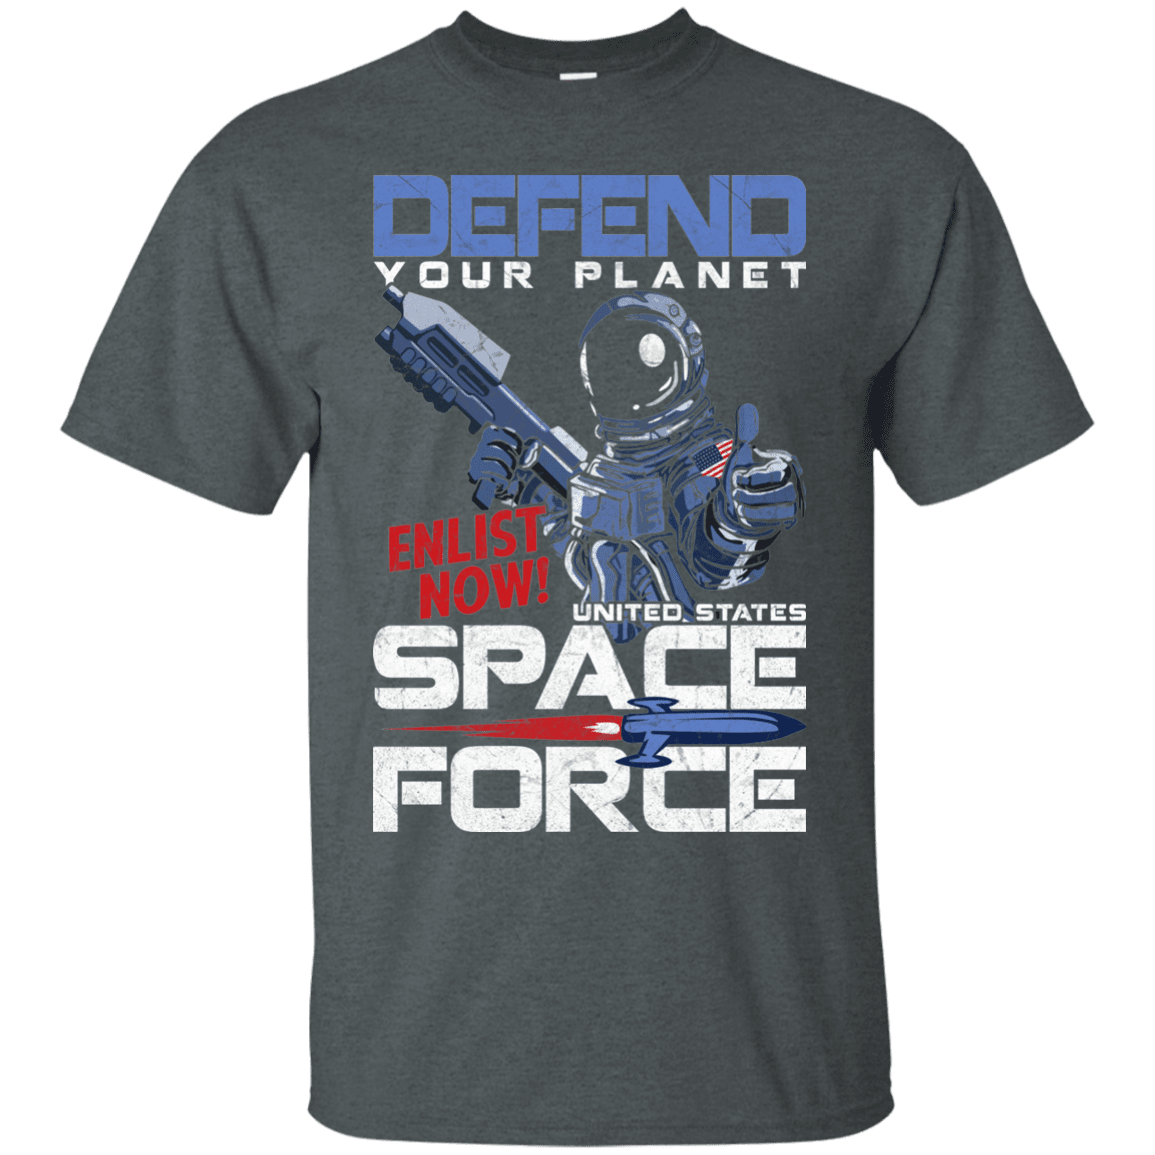 Defend Your Planet Space Force Men Front Tank Top-TShirt-USAF-Veterans Nation